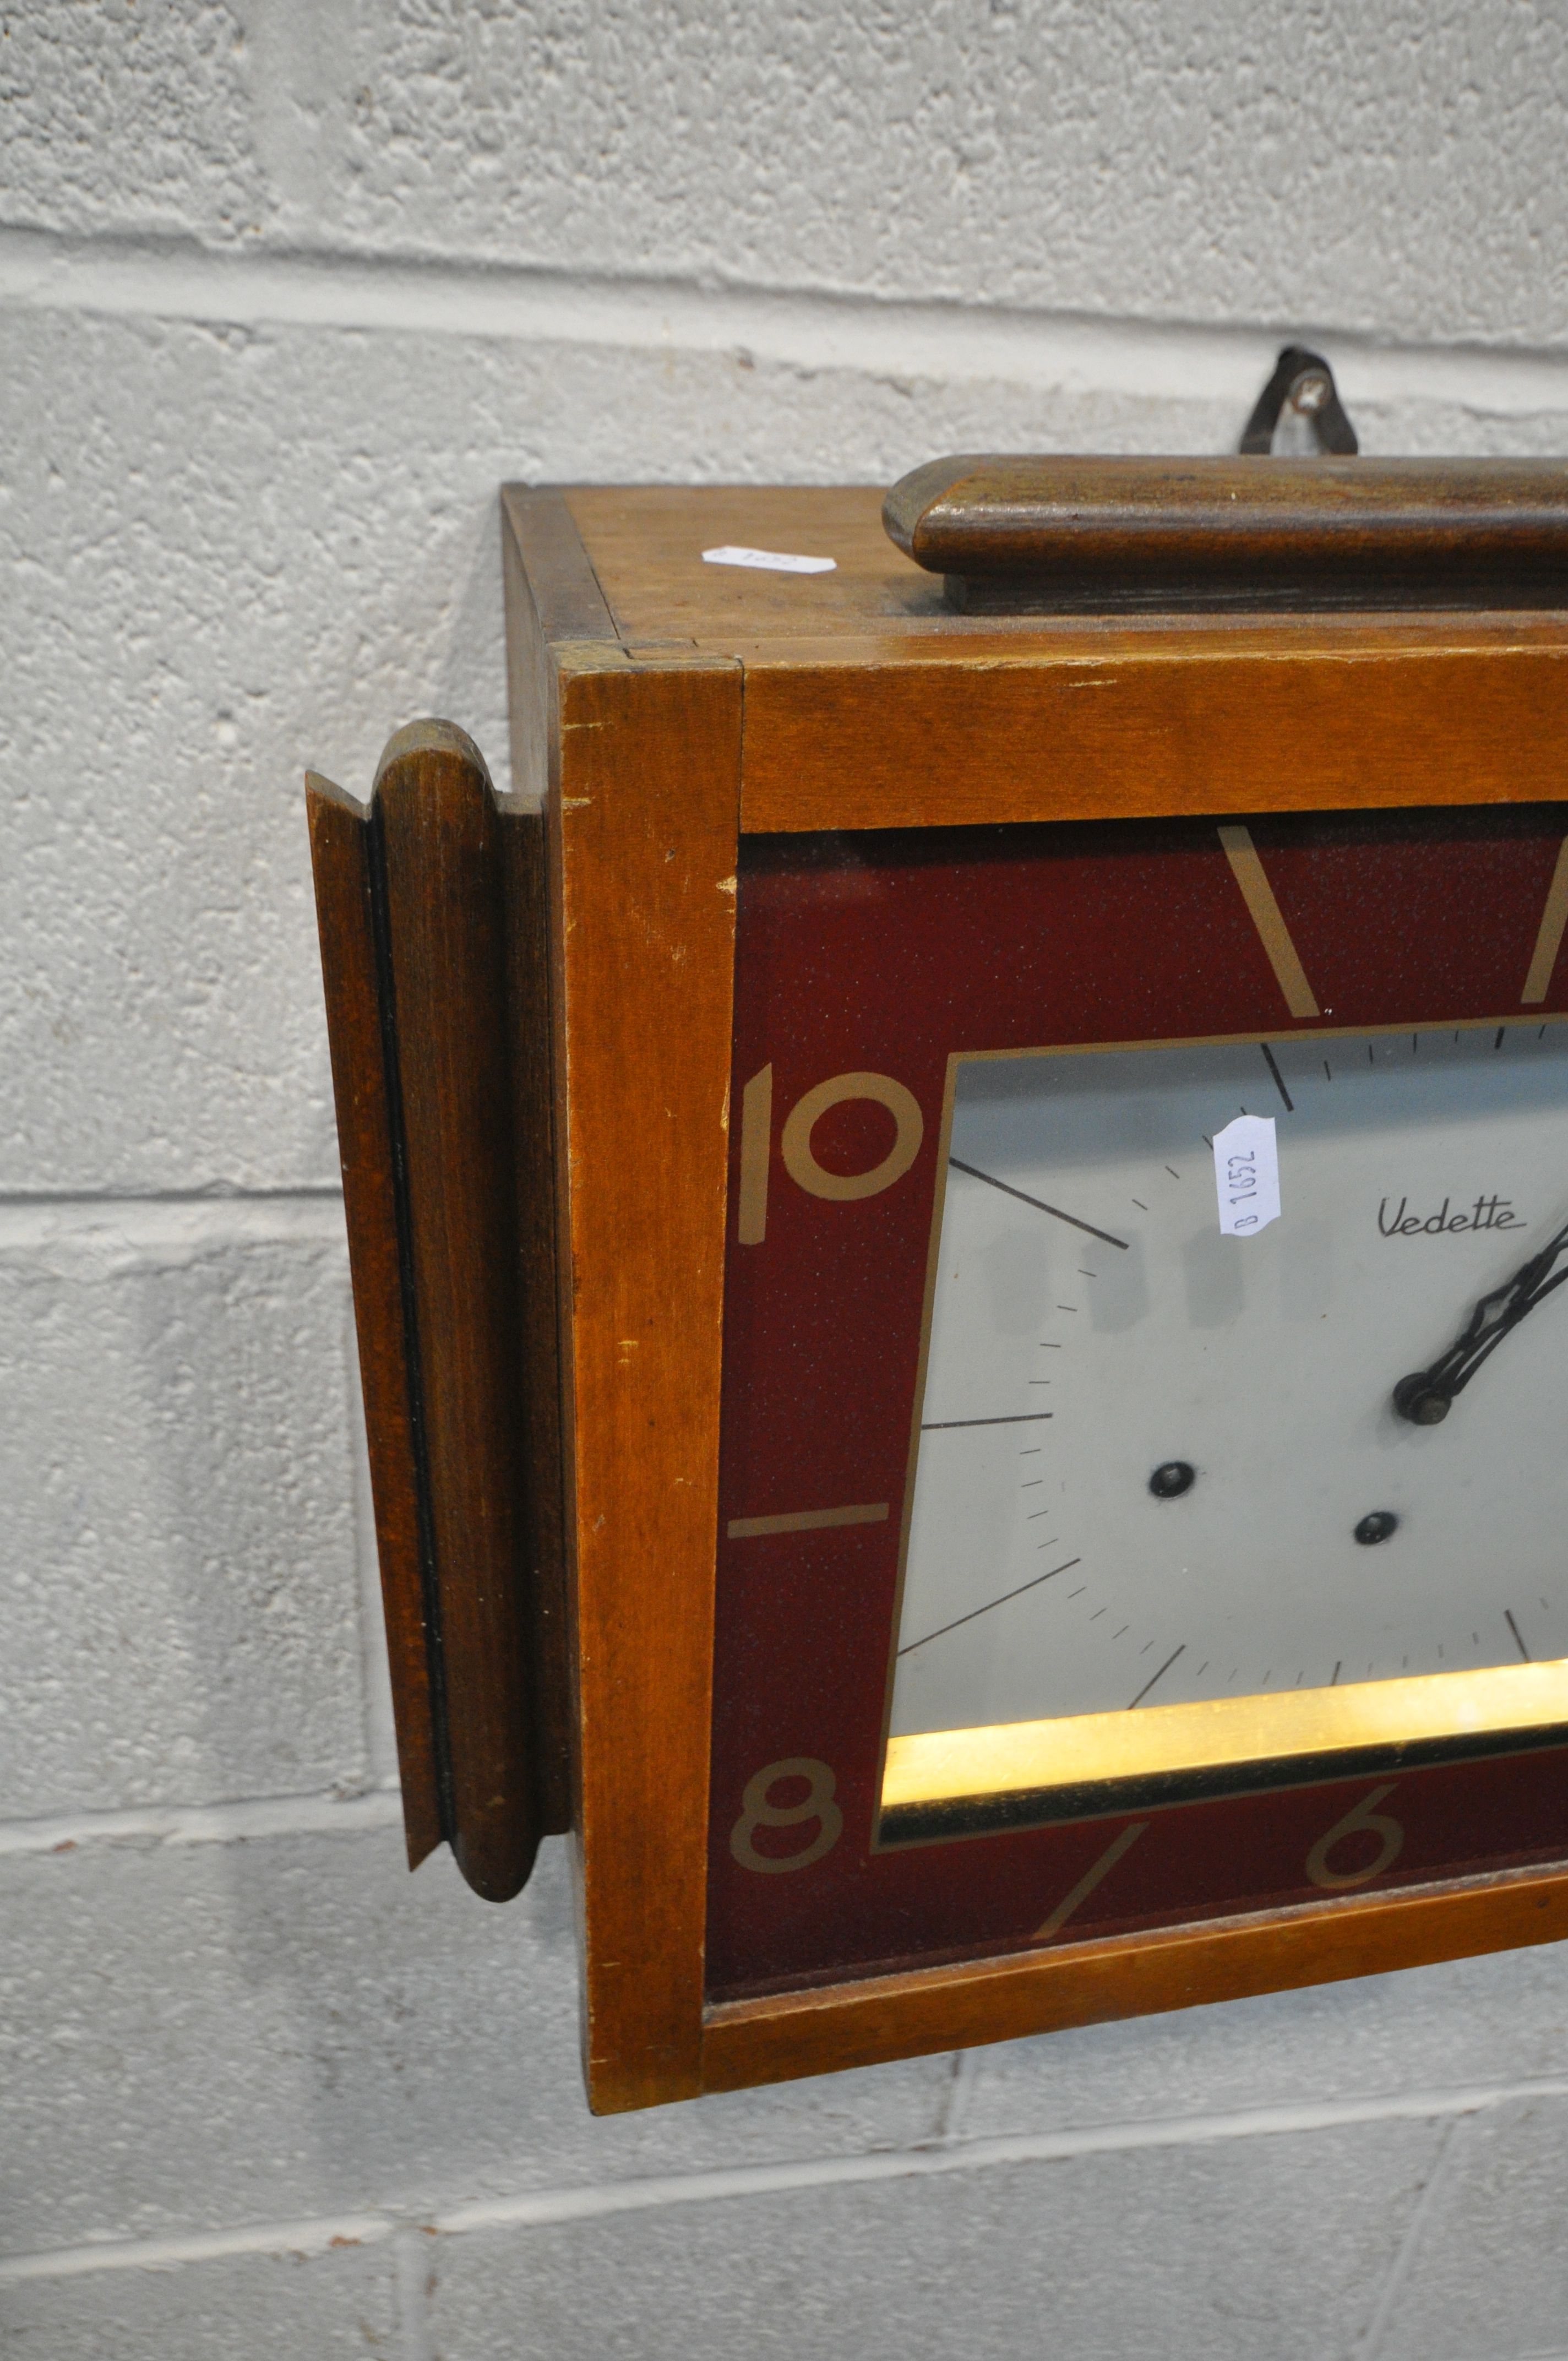 AN ART DECO WALNUT WALL CLOCK, labelled Vedette to the face, width 46cm x depth 17cm x height - Image 2 of 4